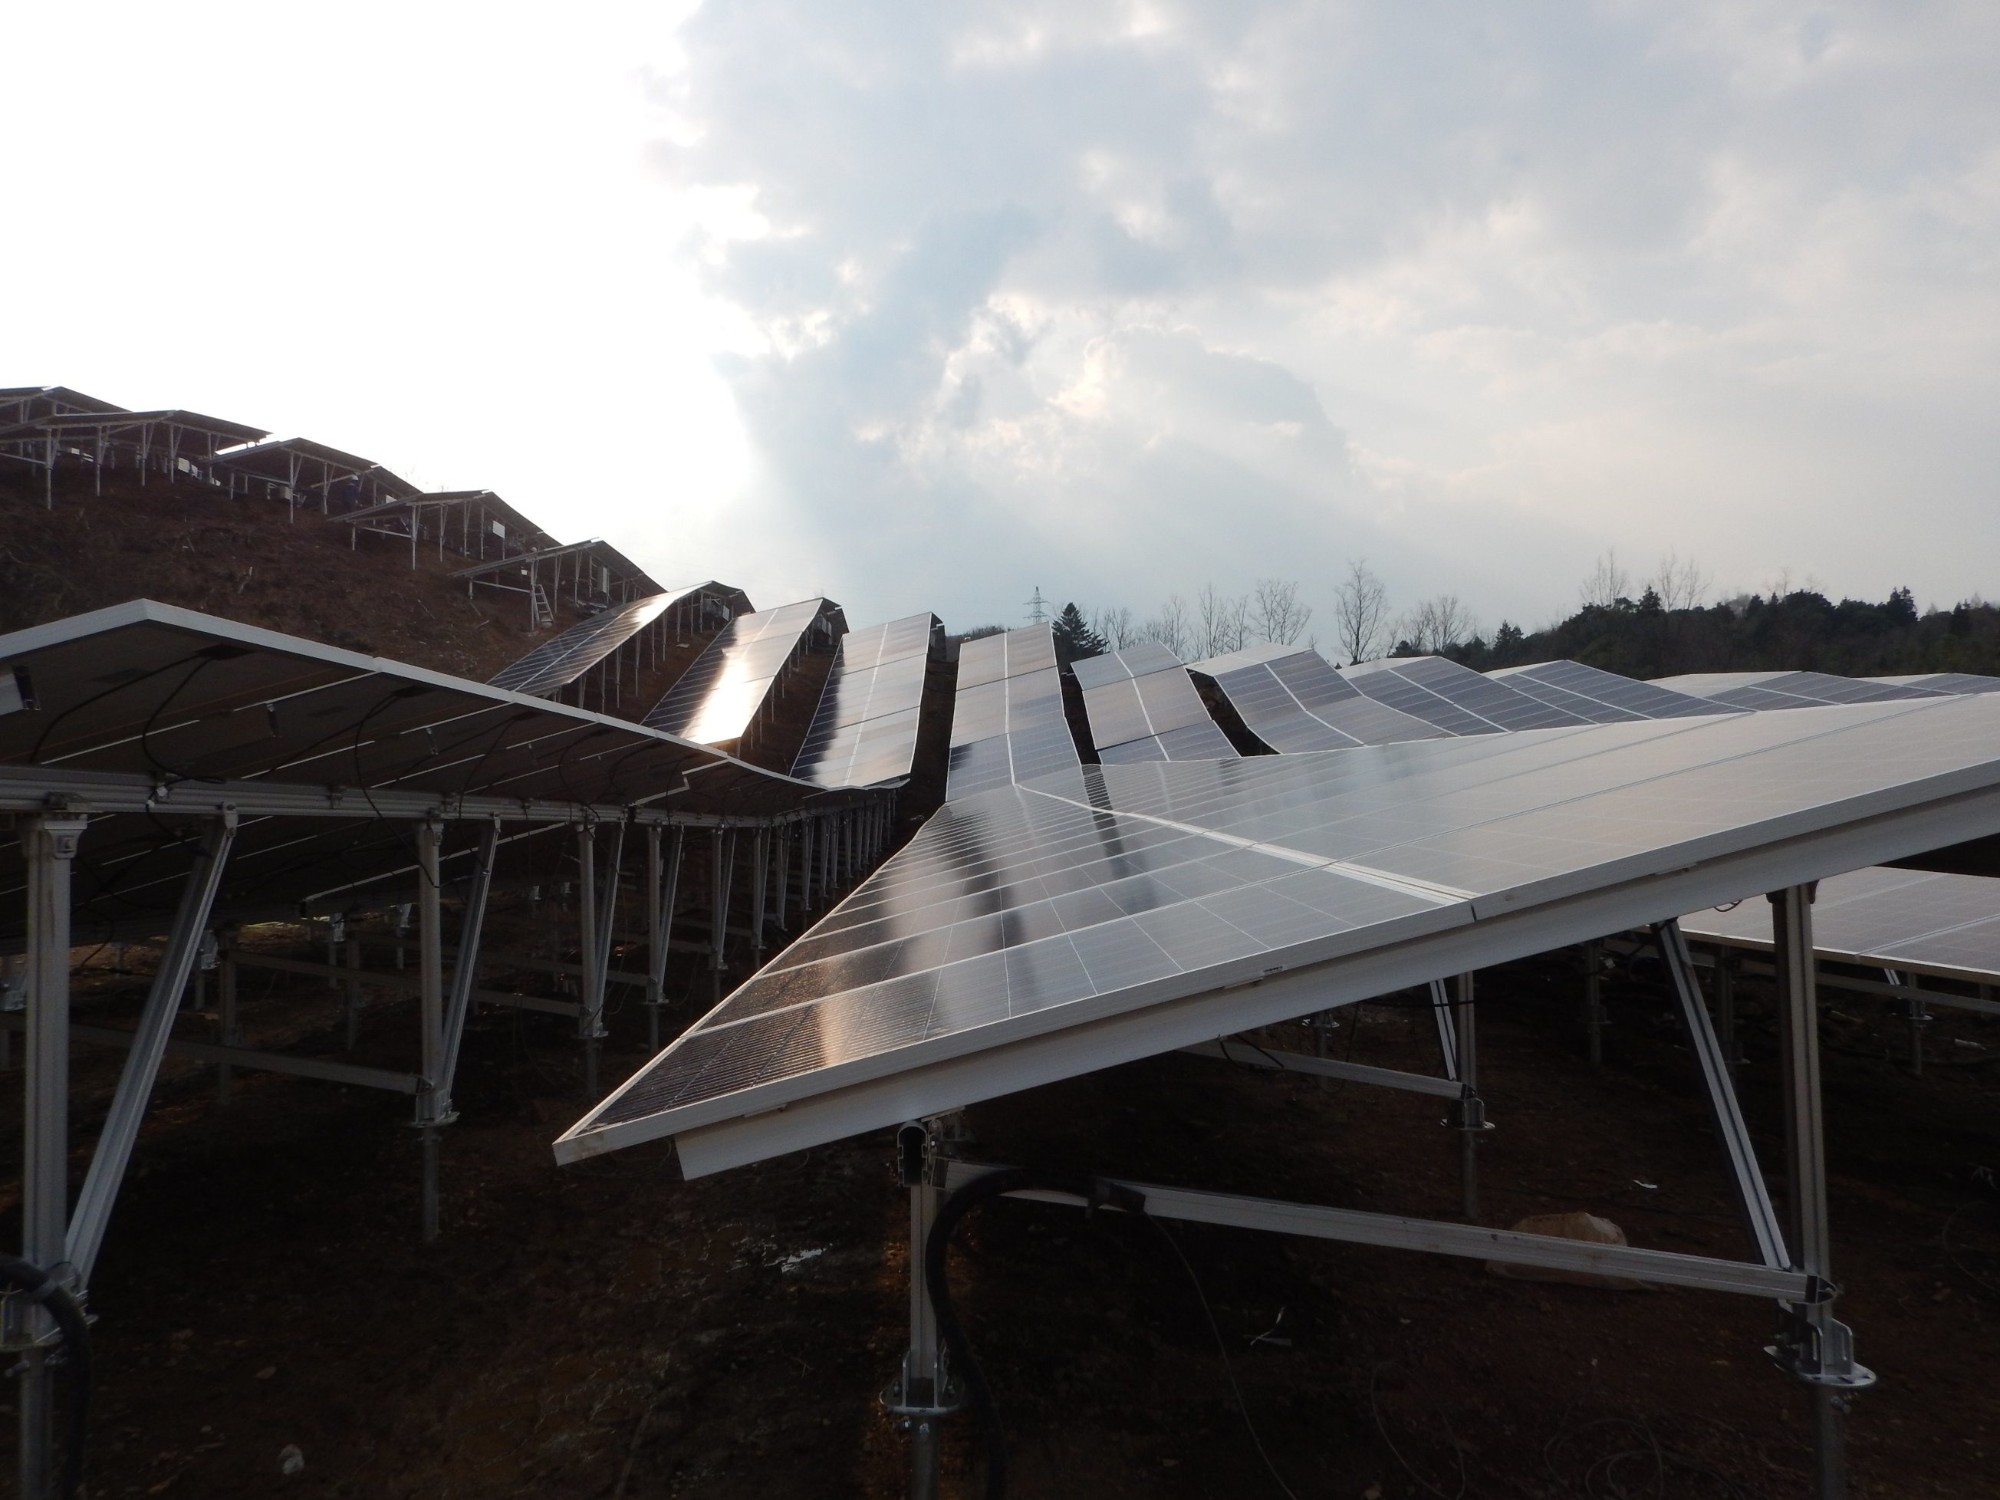 N Type Ground Solar Mounting System Manufacturers, N Type Ground Solar Mounting System Factory, Supply N Type Ground Solar Mounting System